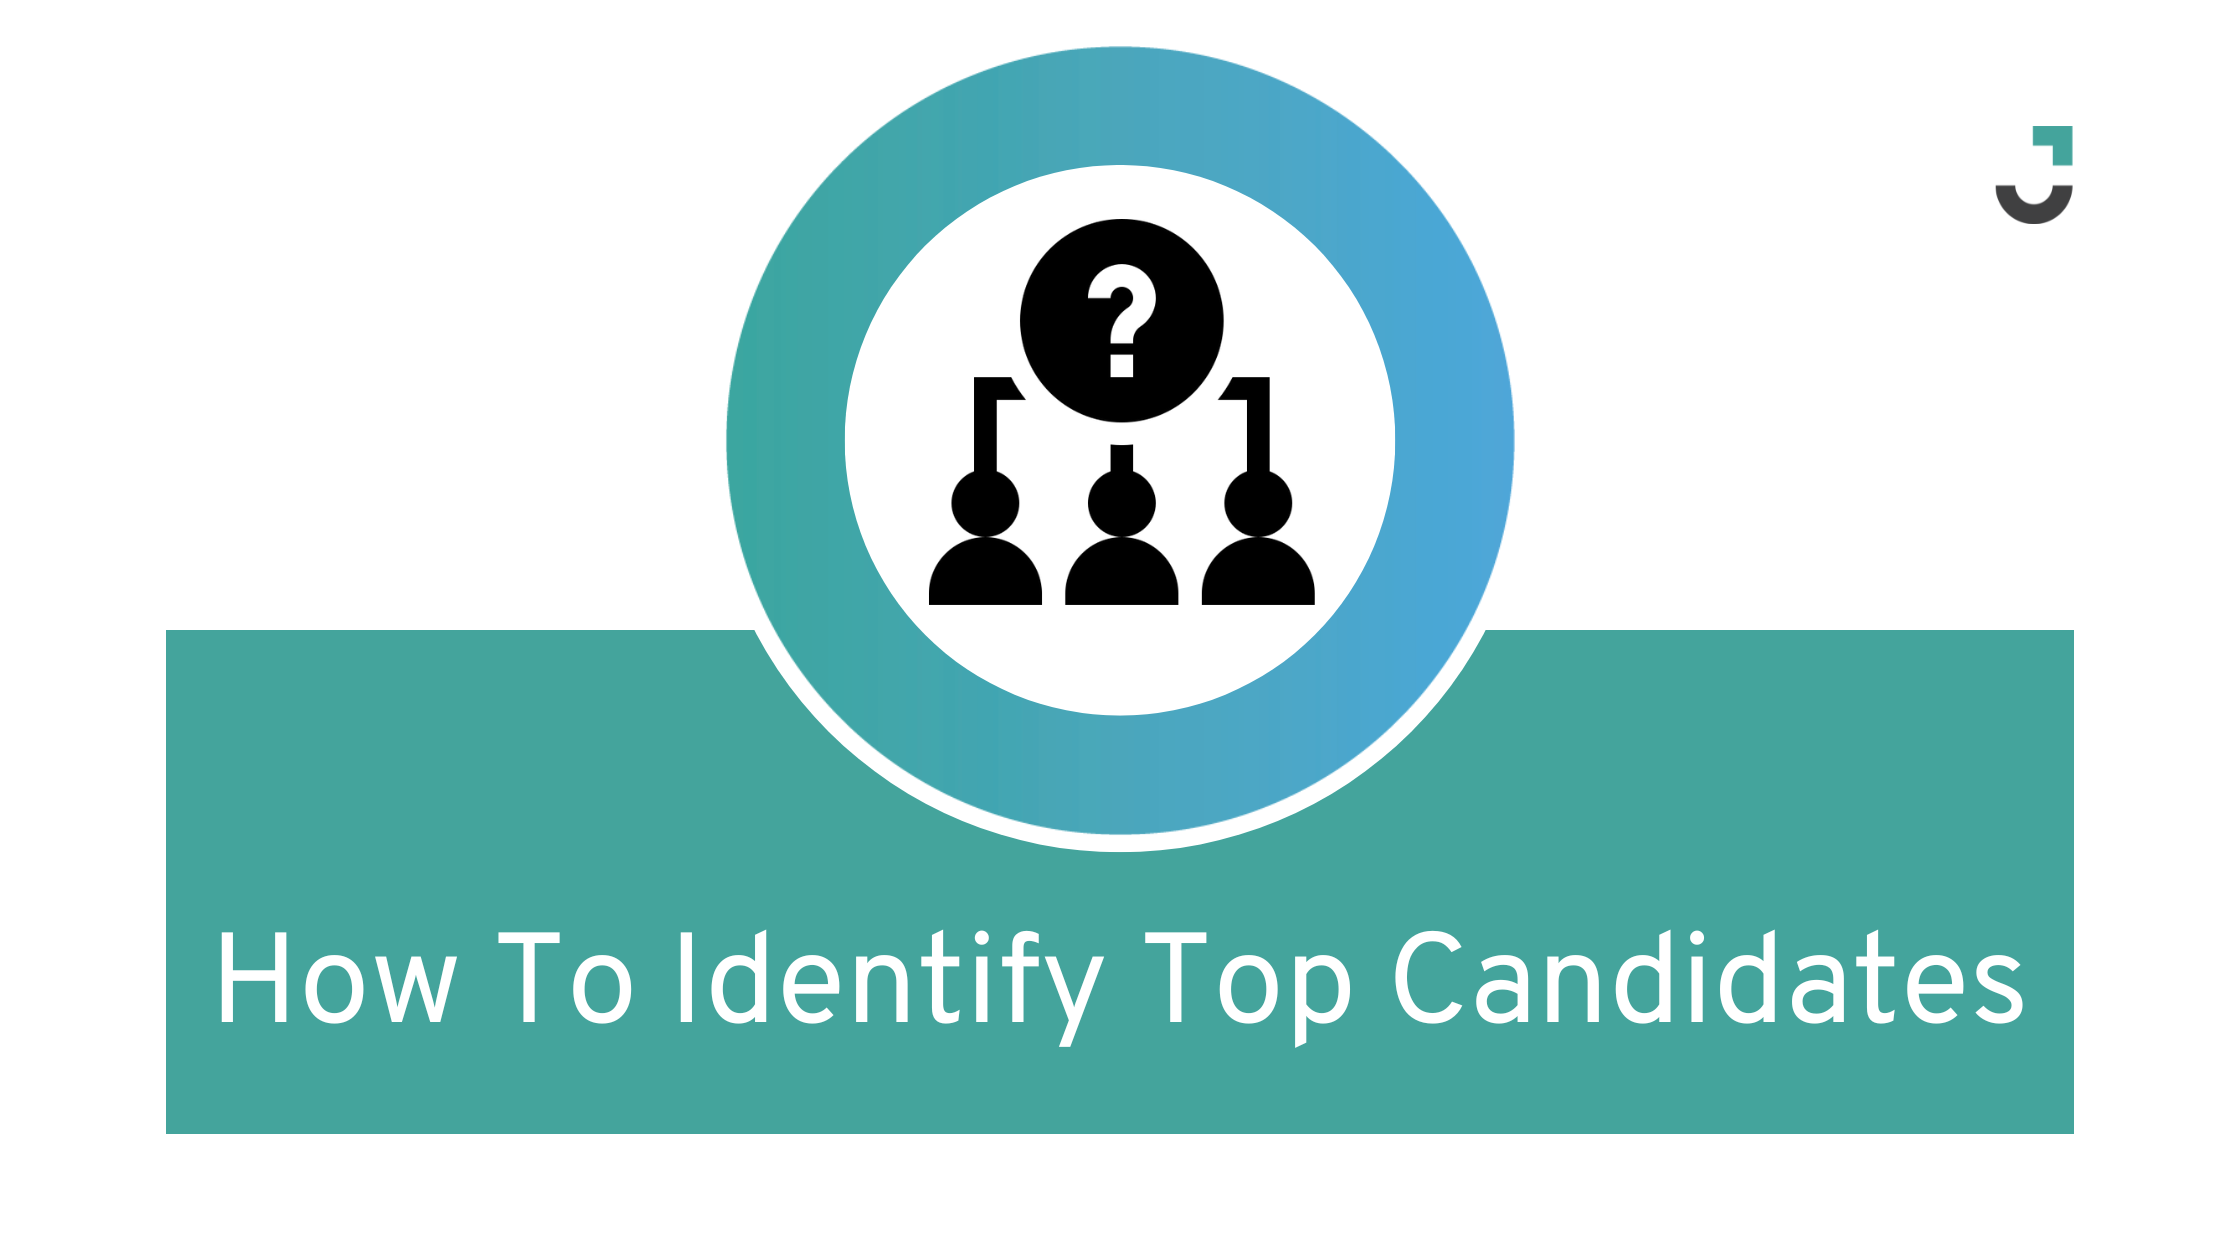 How To Identify Top Candidates